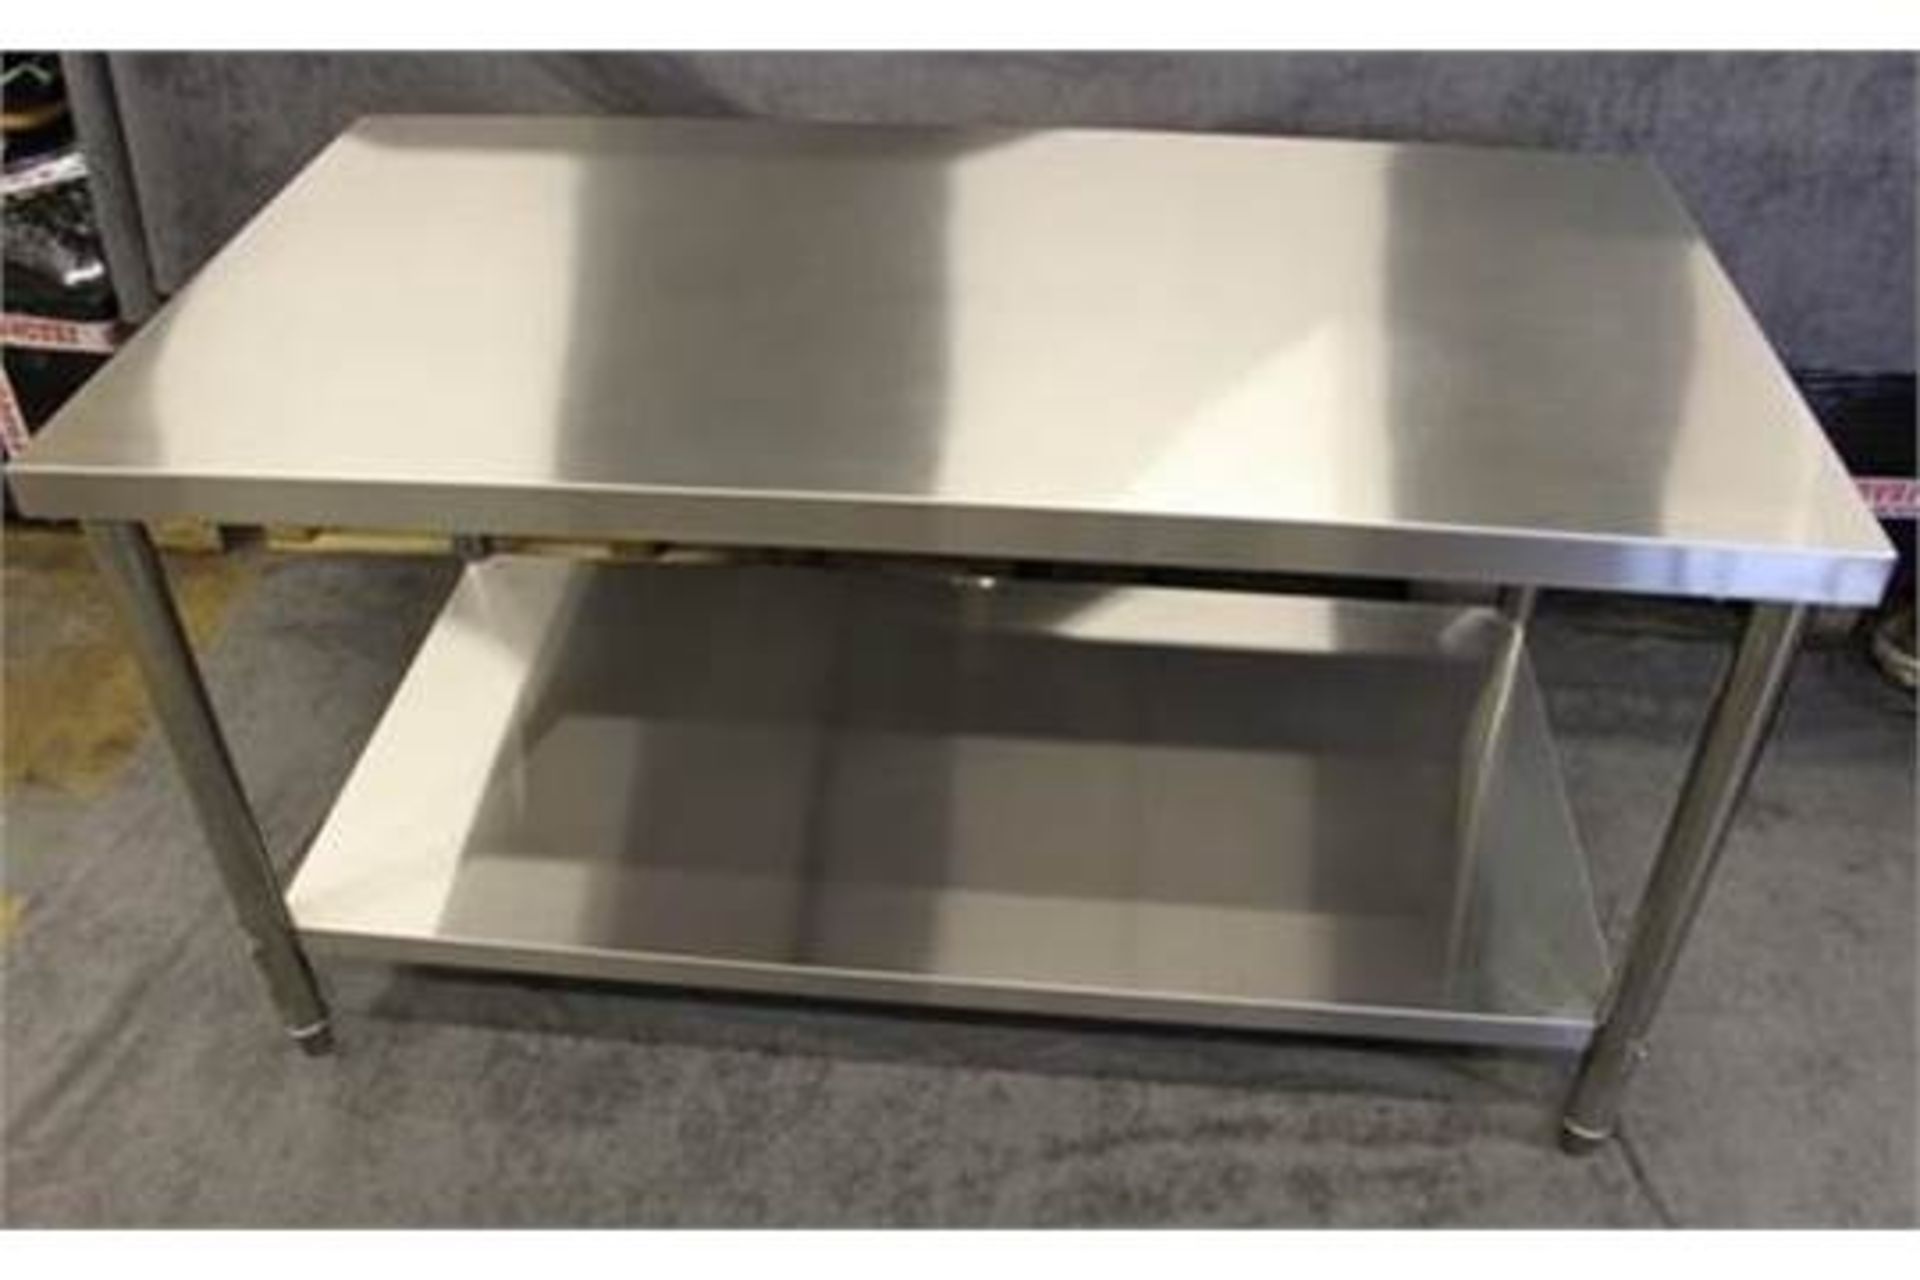 Brand new Stainless-steel table boxed and flat packed for cheap delivery 1500mm x 800mm x 800mm